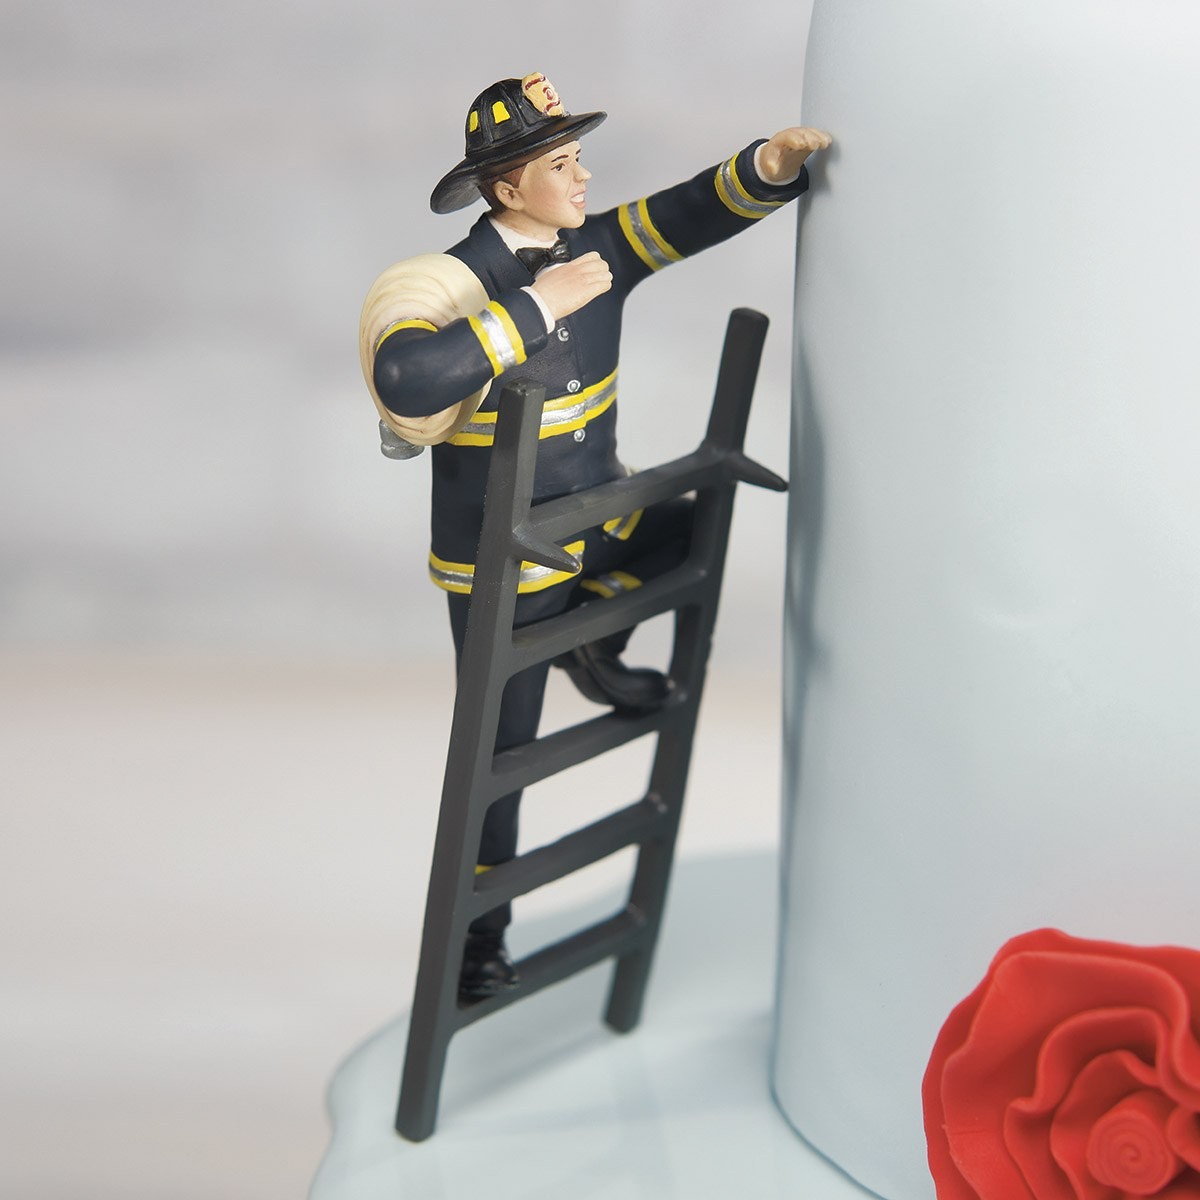 Fireman Groom Figurine - Wedding Cake Topper - To The Rescue! 